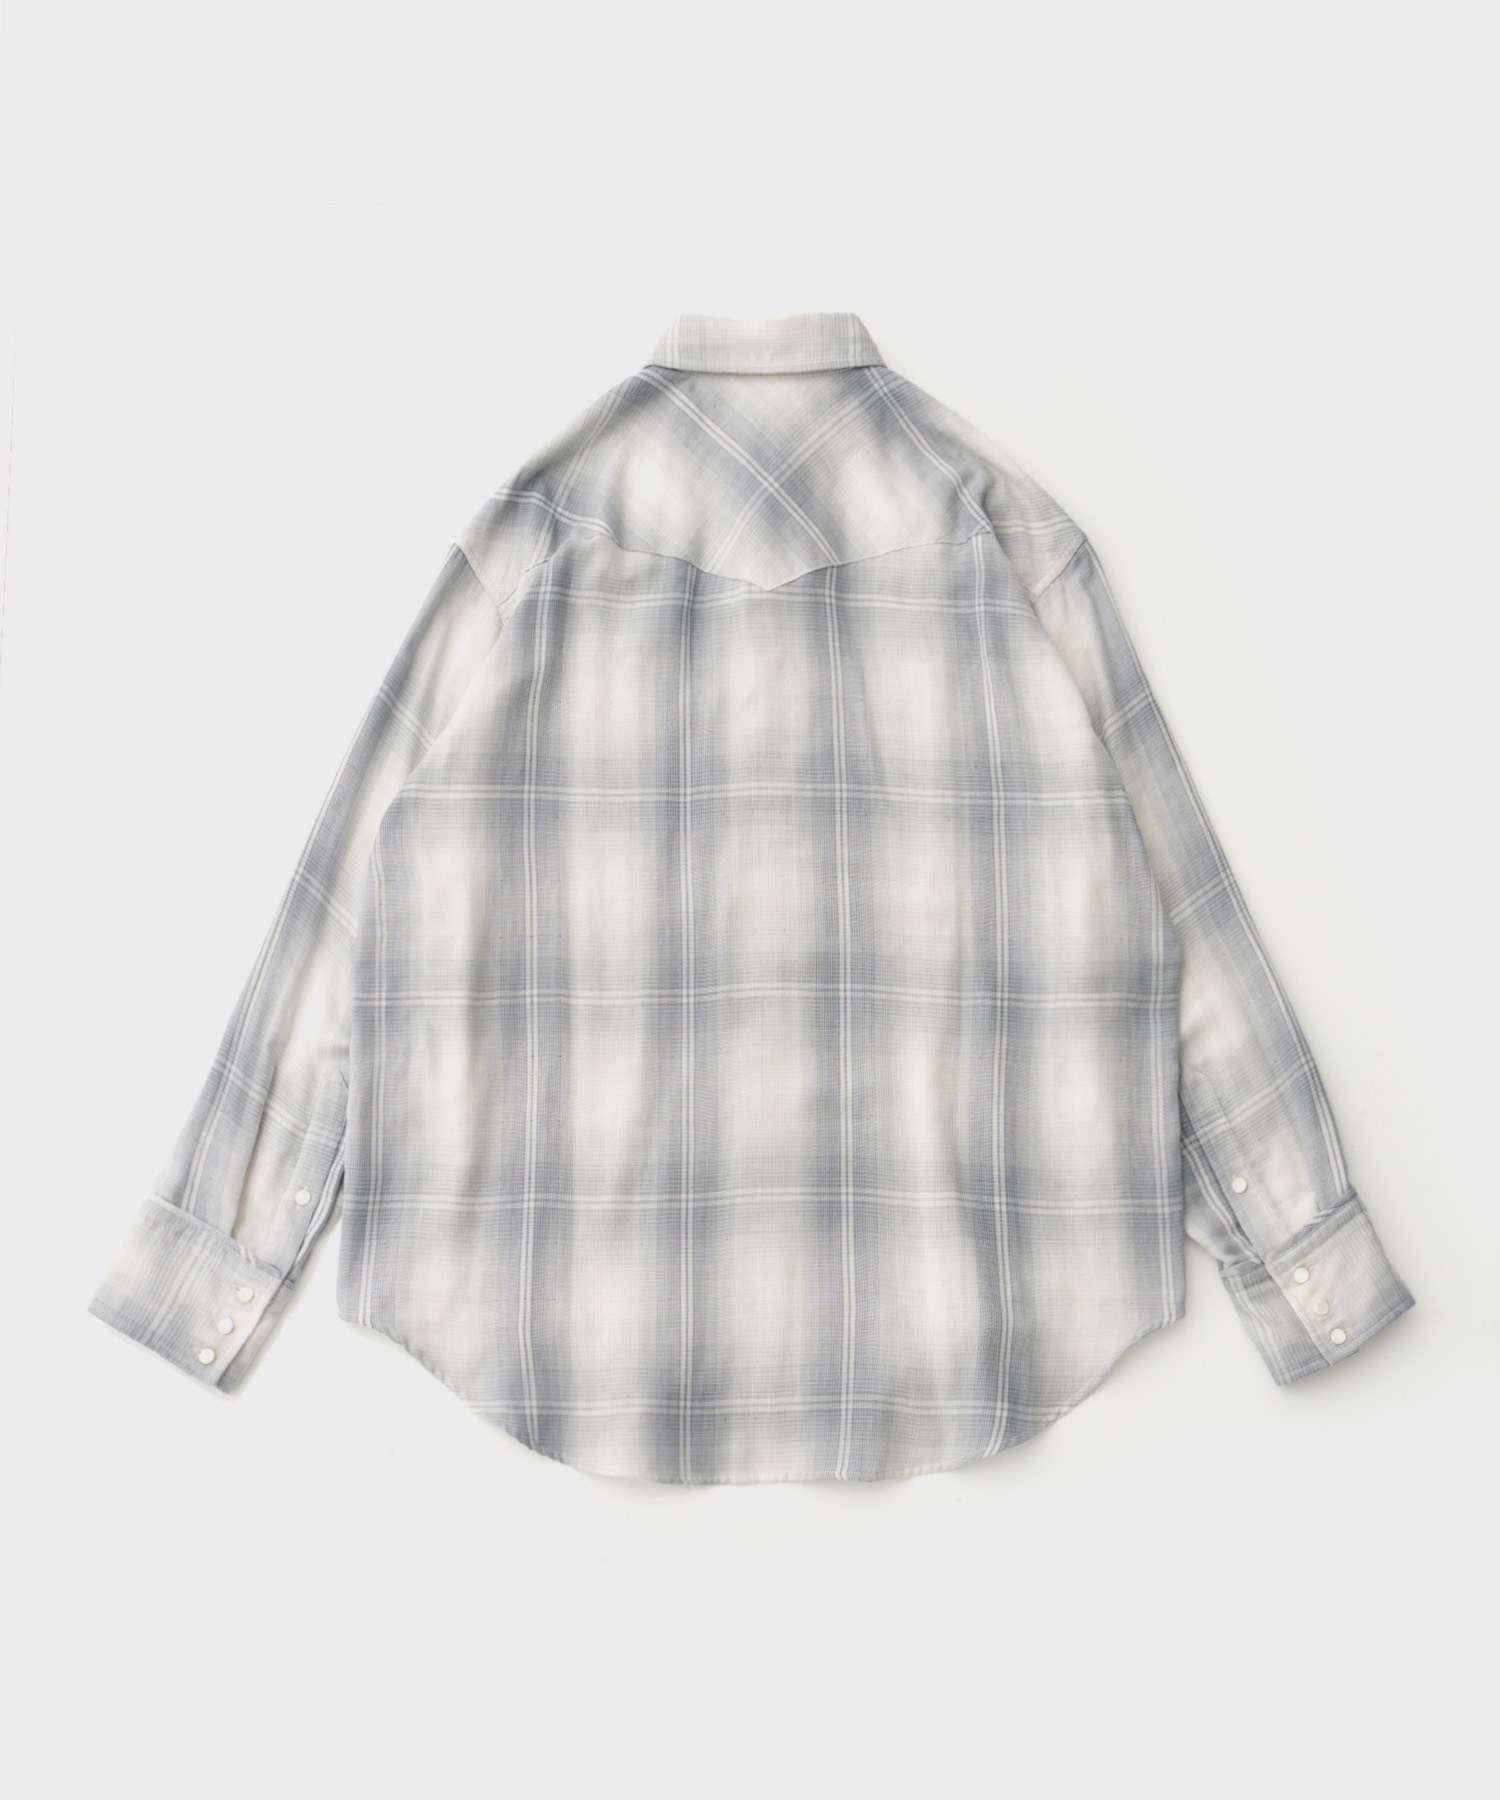 Western Shirt L/S Triple Gause Gilittery Check (Grey)